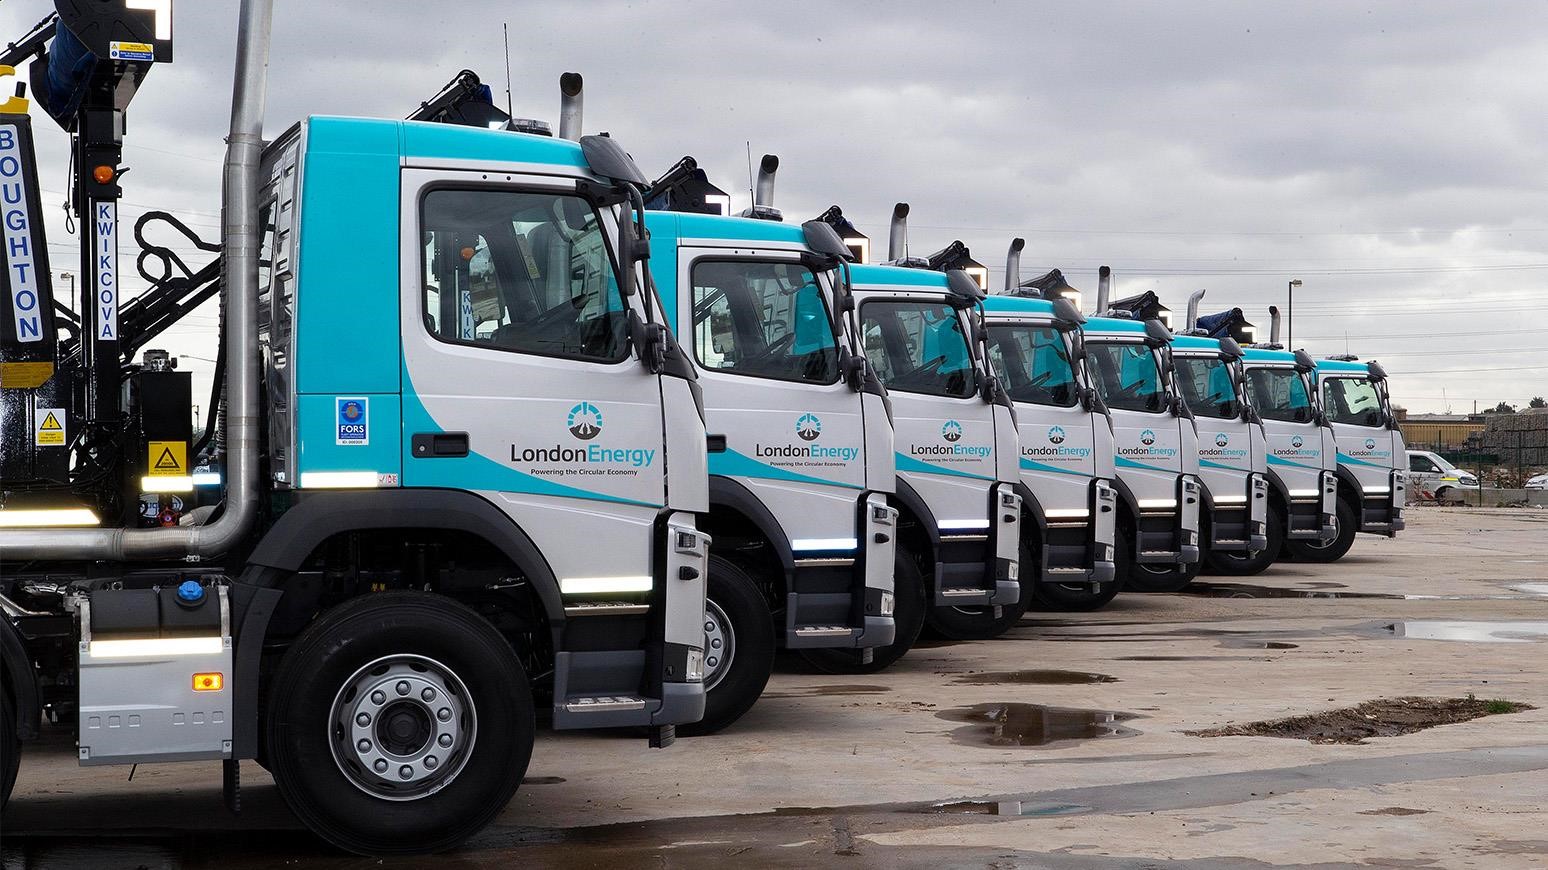 LondonEnergy Adds 9 Volvo FM Hook Loader Trucks For Refuse Collection Operations